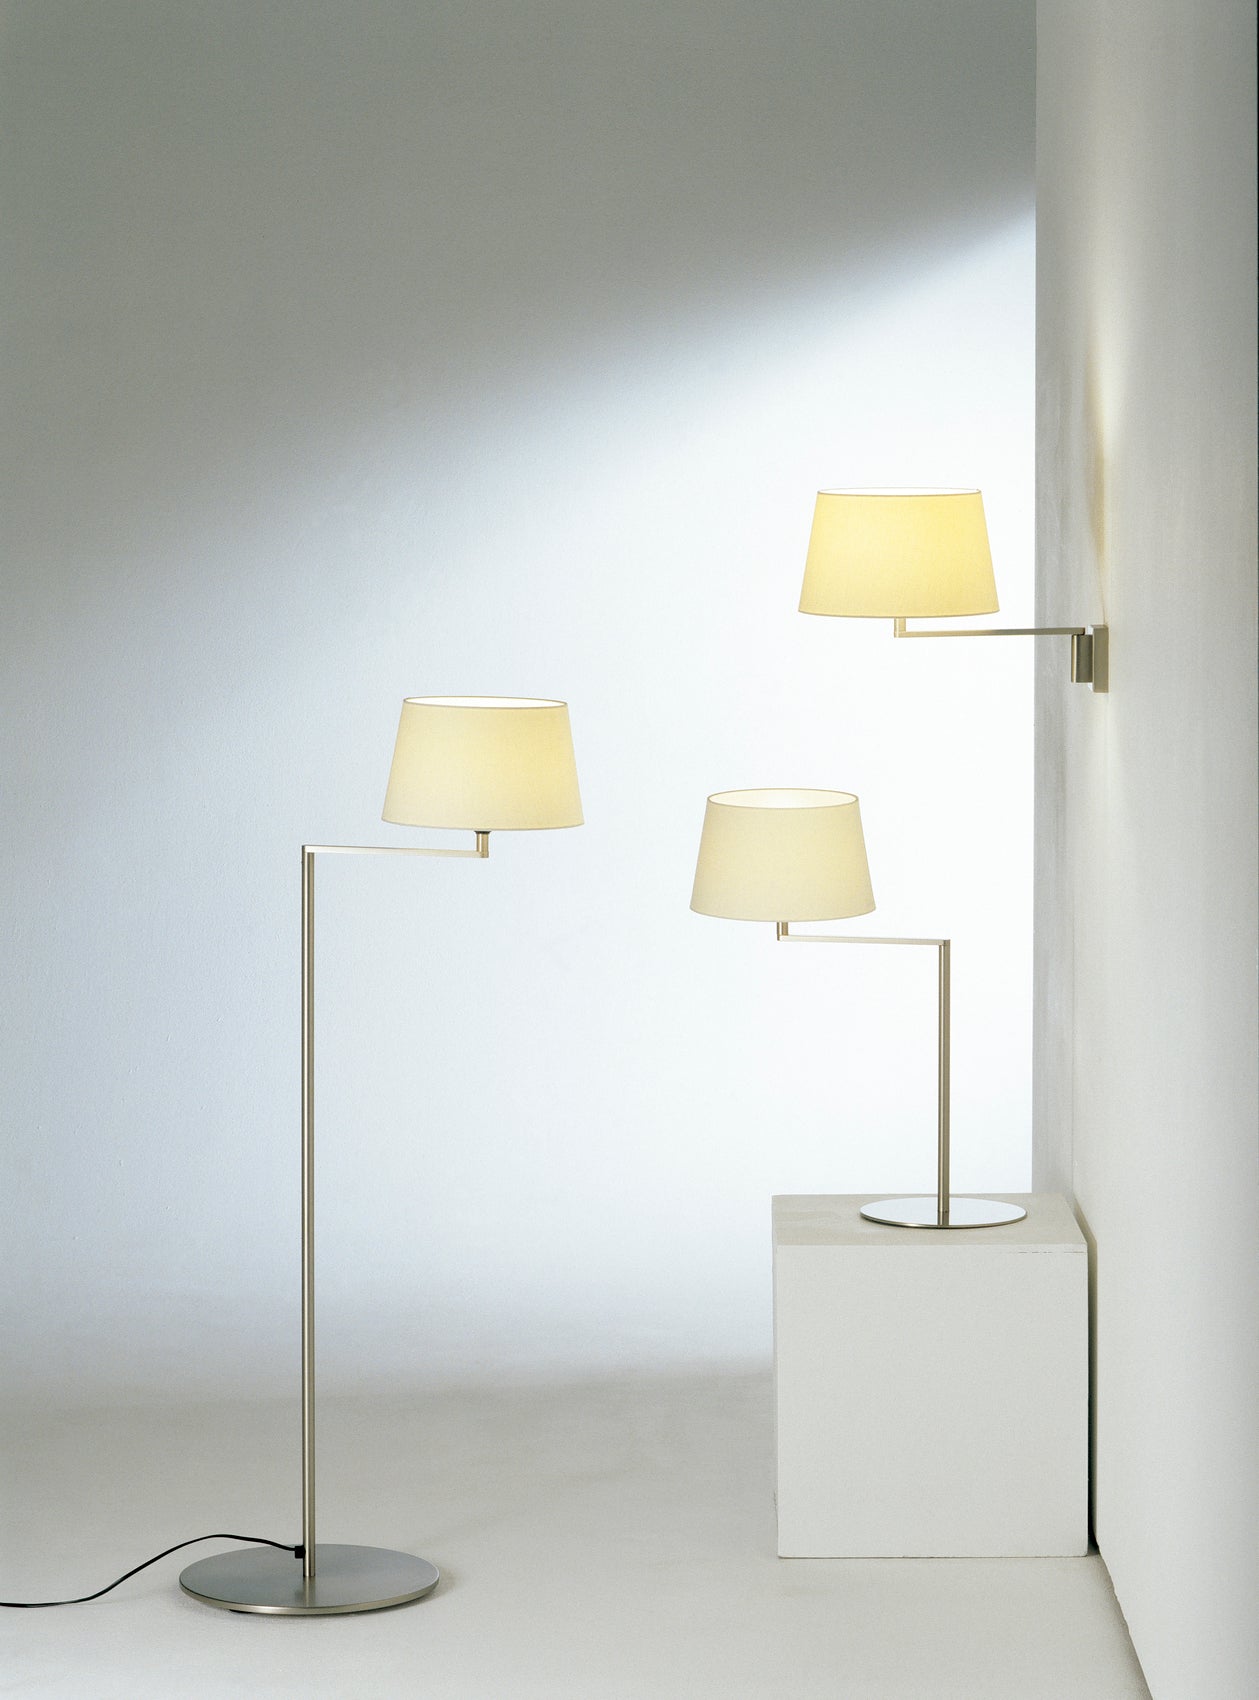 Iconic Americana Lamp Design by Miguel Mila